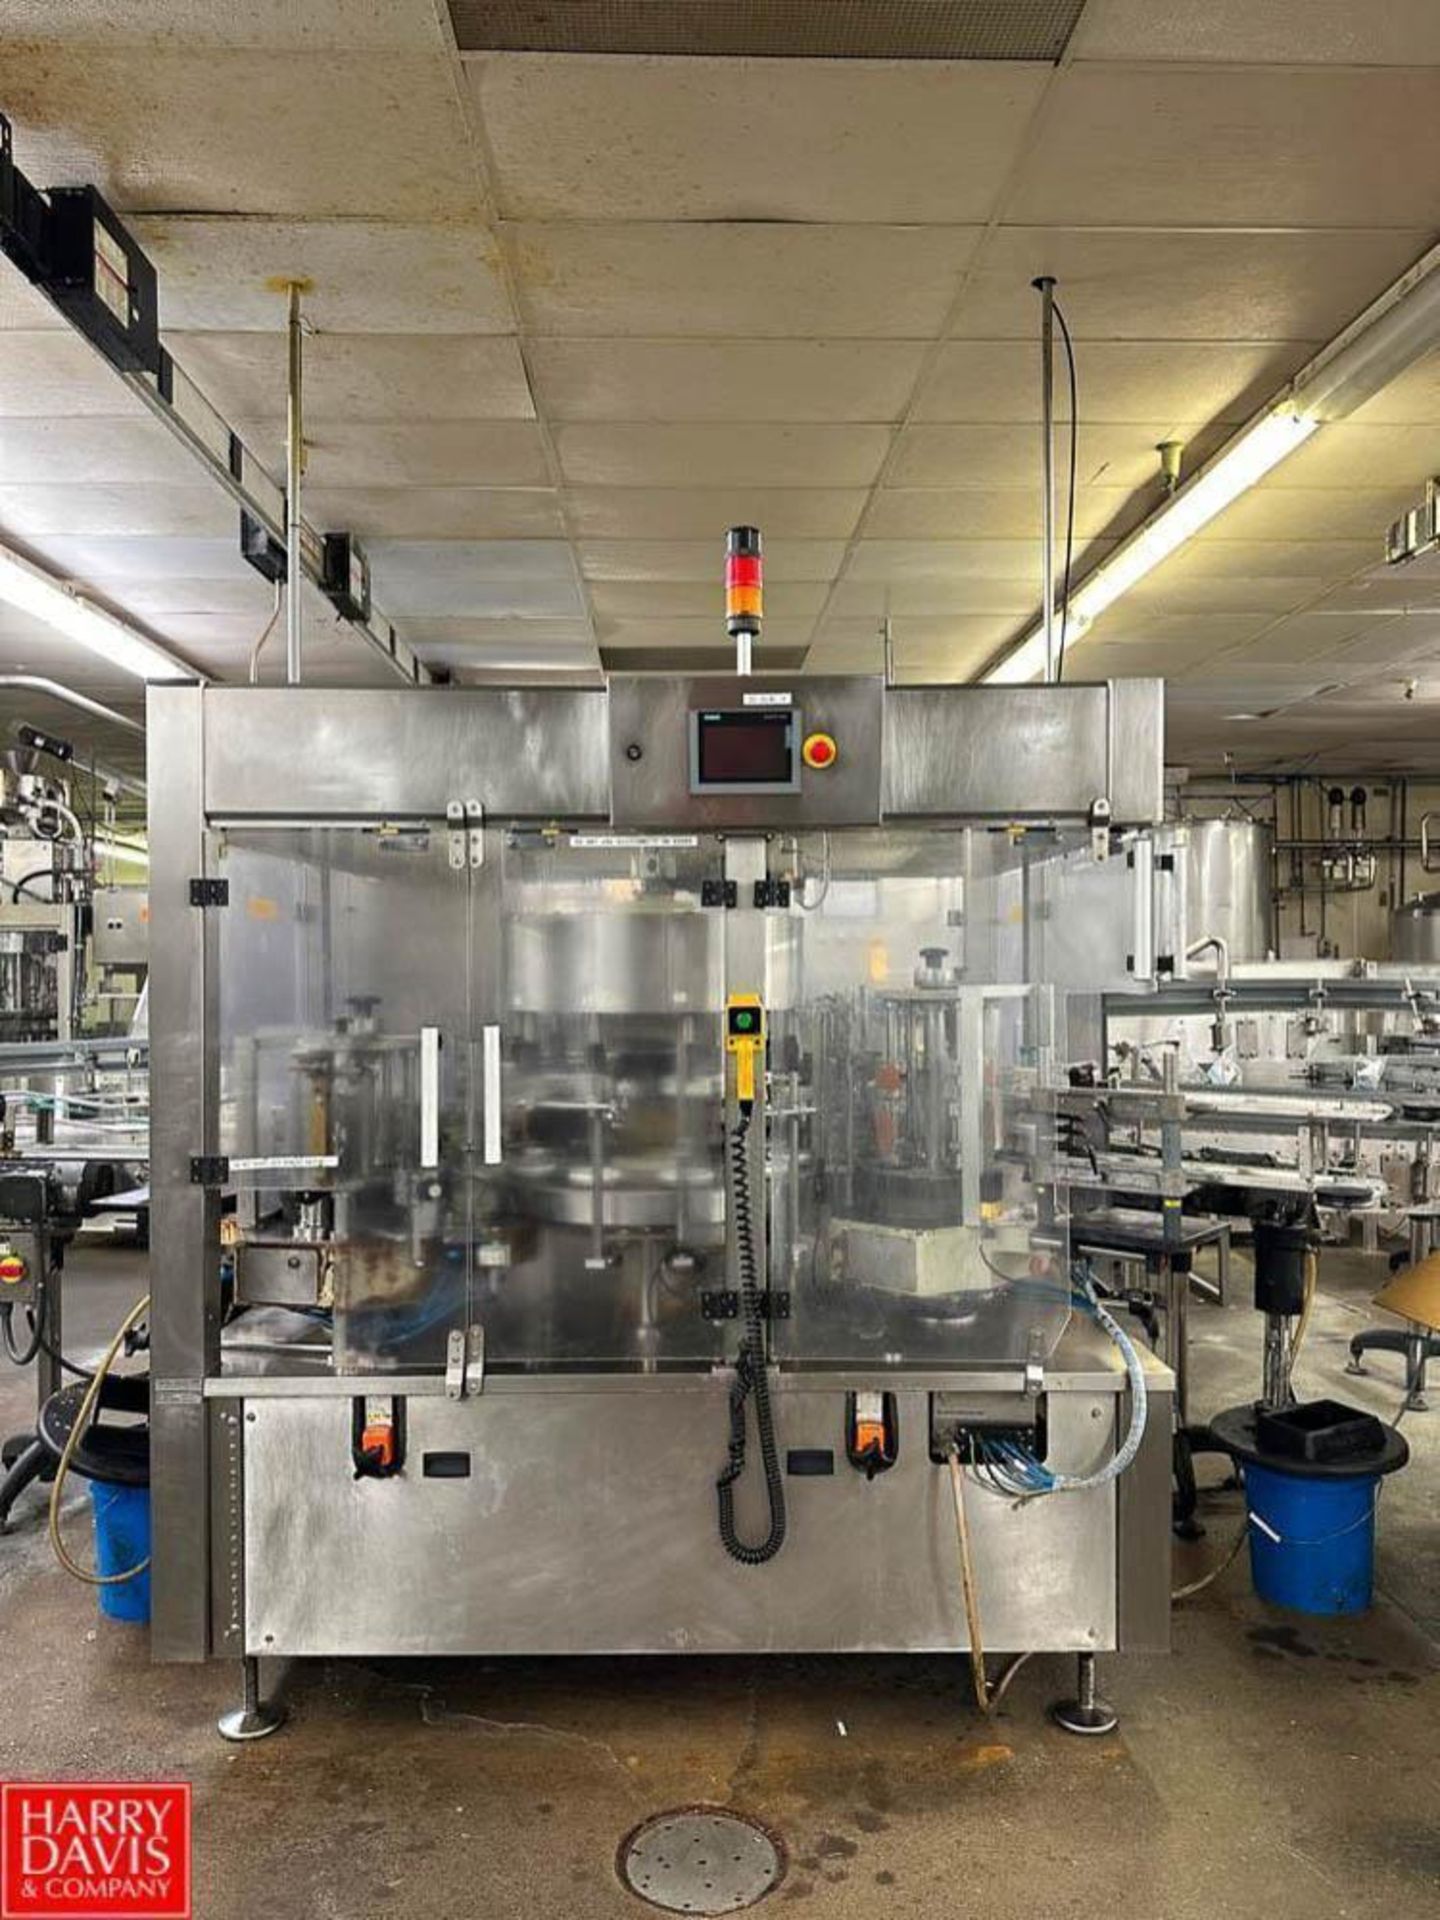 2019 Gernep 10-Station Cut & Stack Cold Glue Labeling Machine, Model: Labetta with Siemens 10-Head - Image 2 of 7